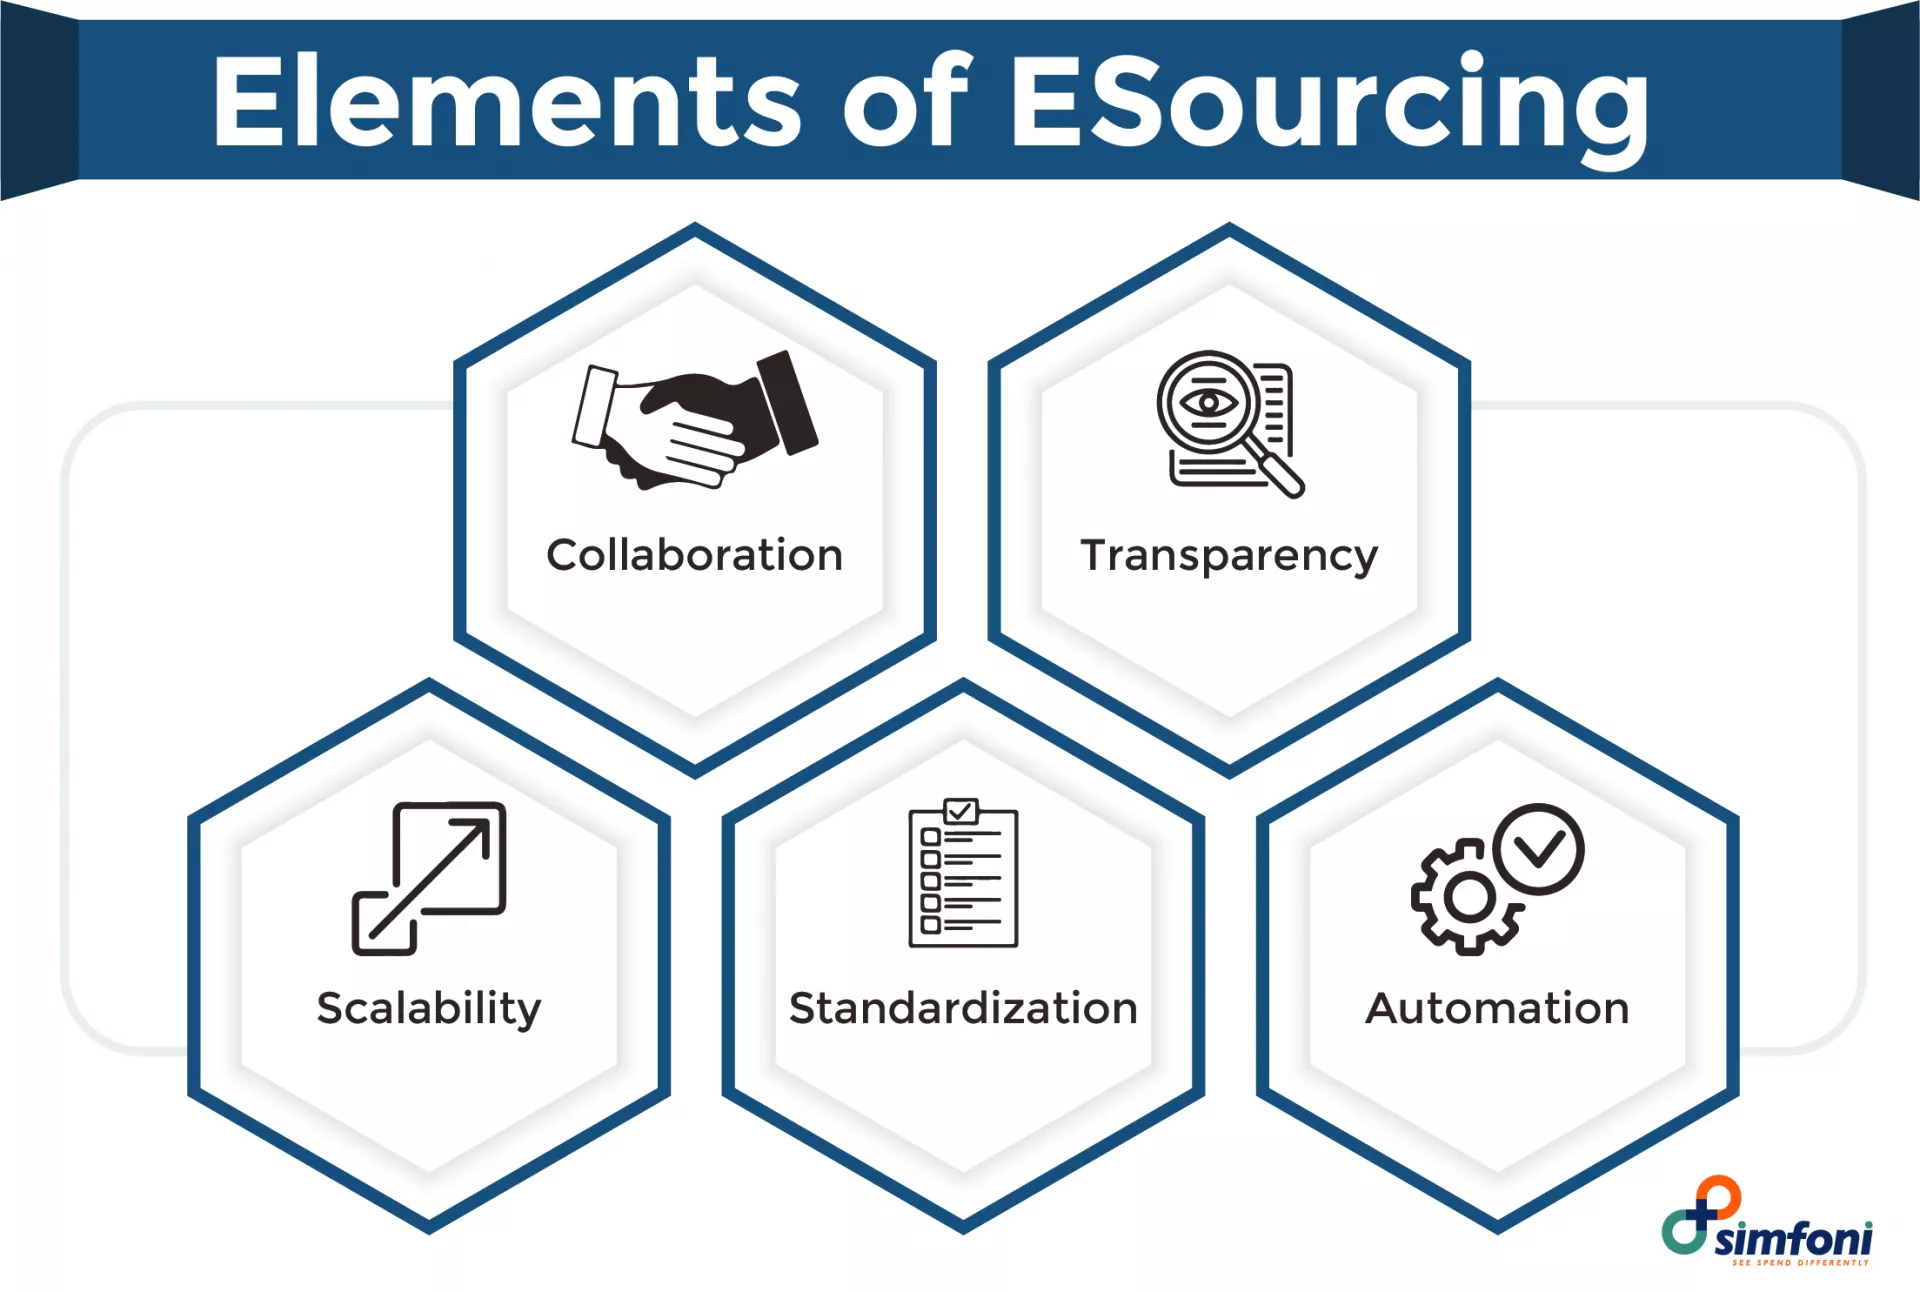 Elements of eSourcing